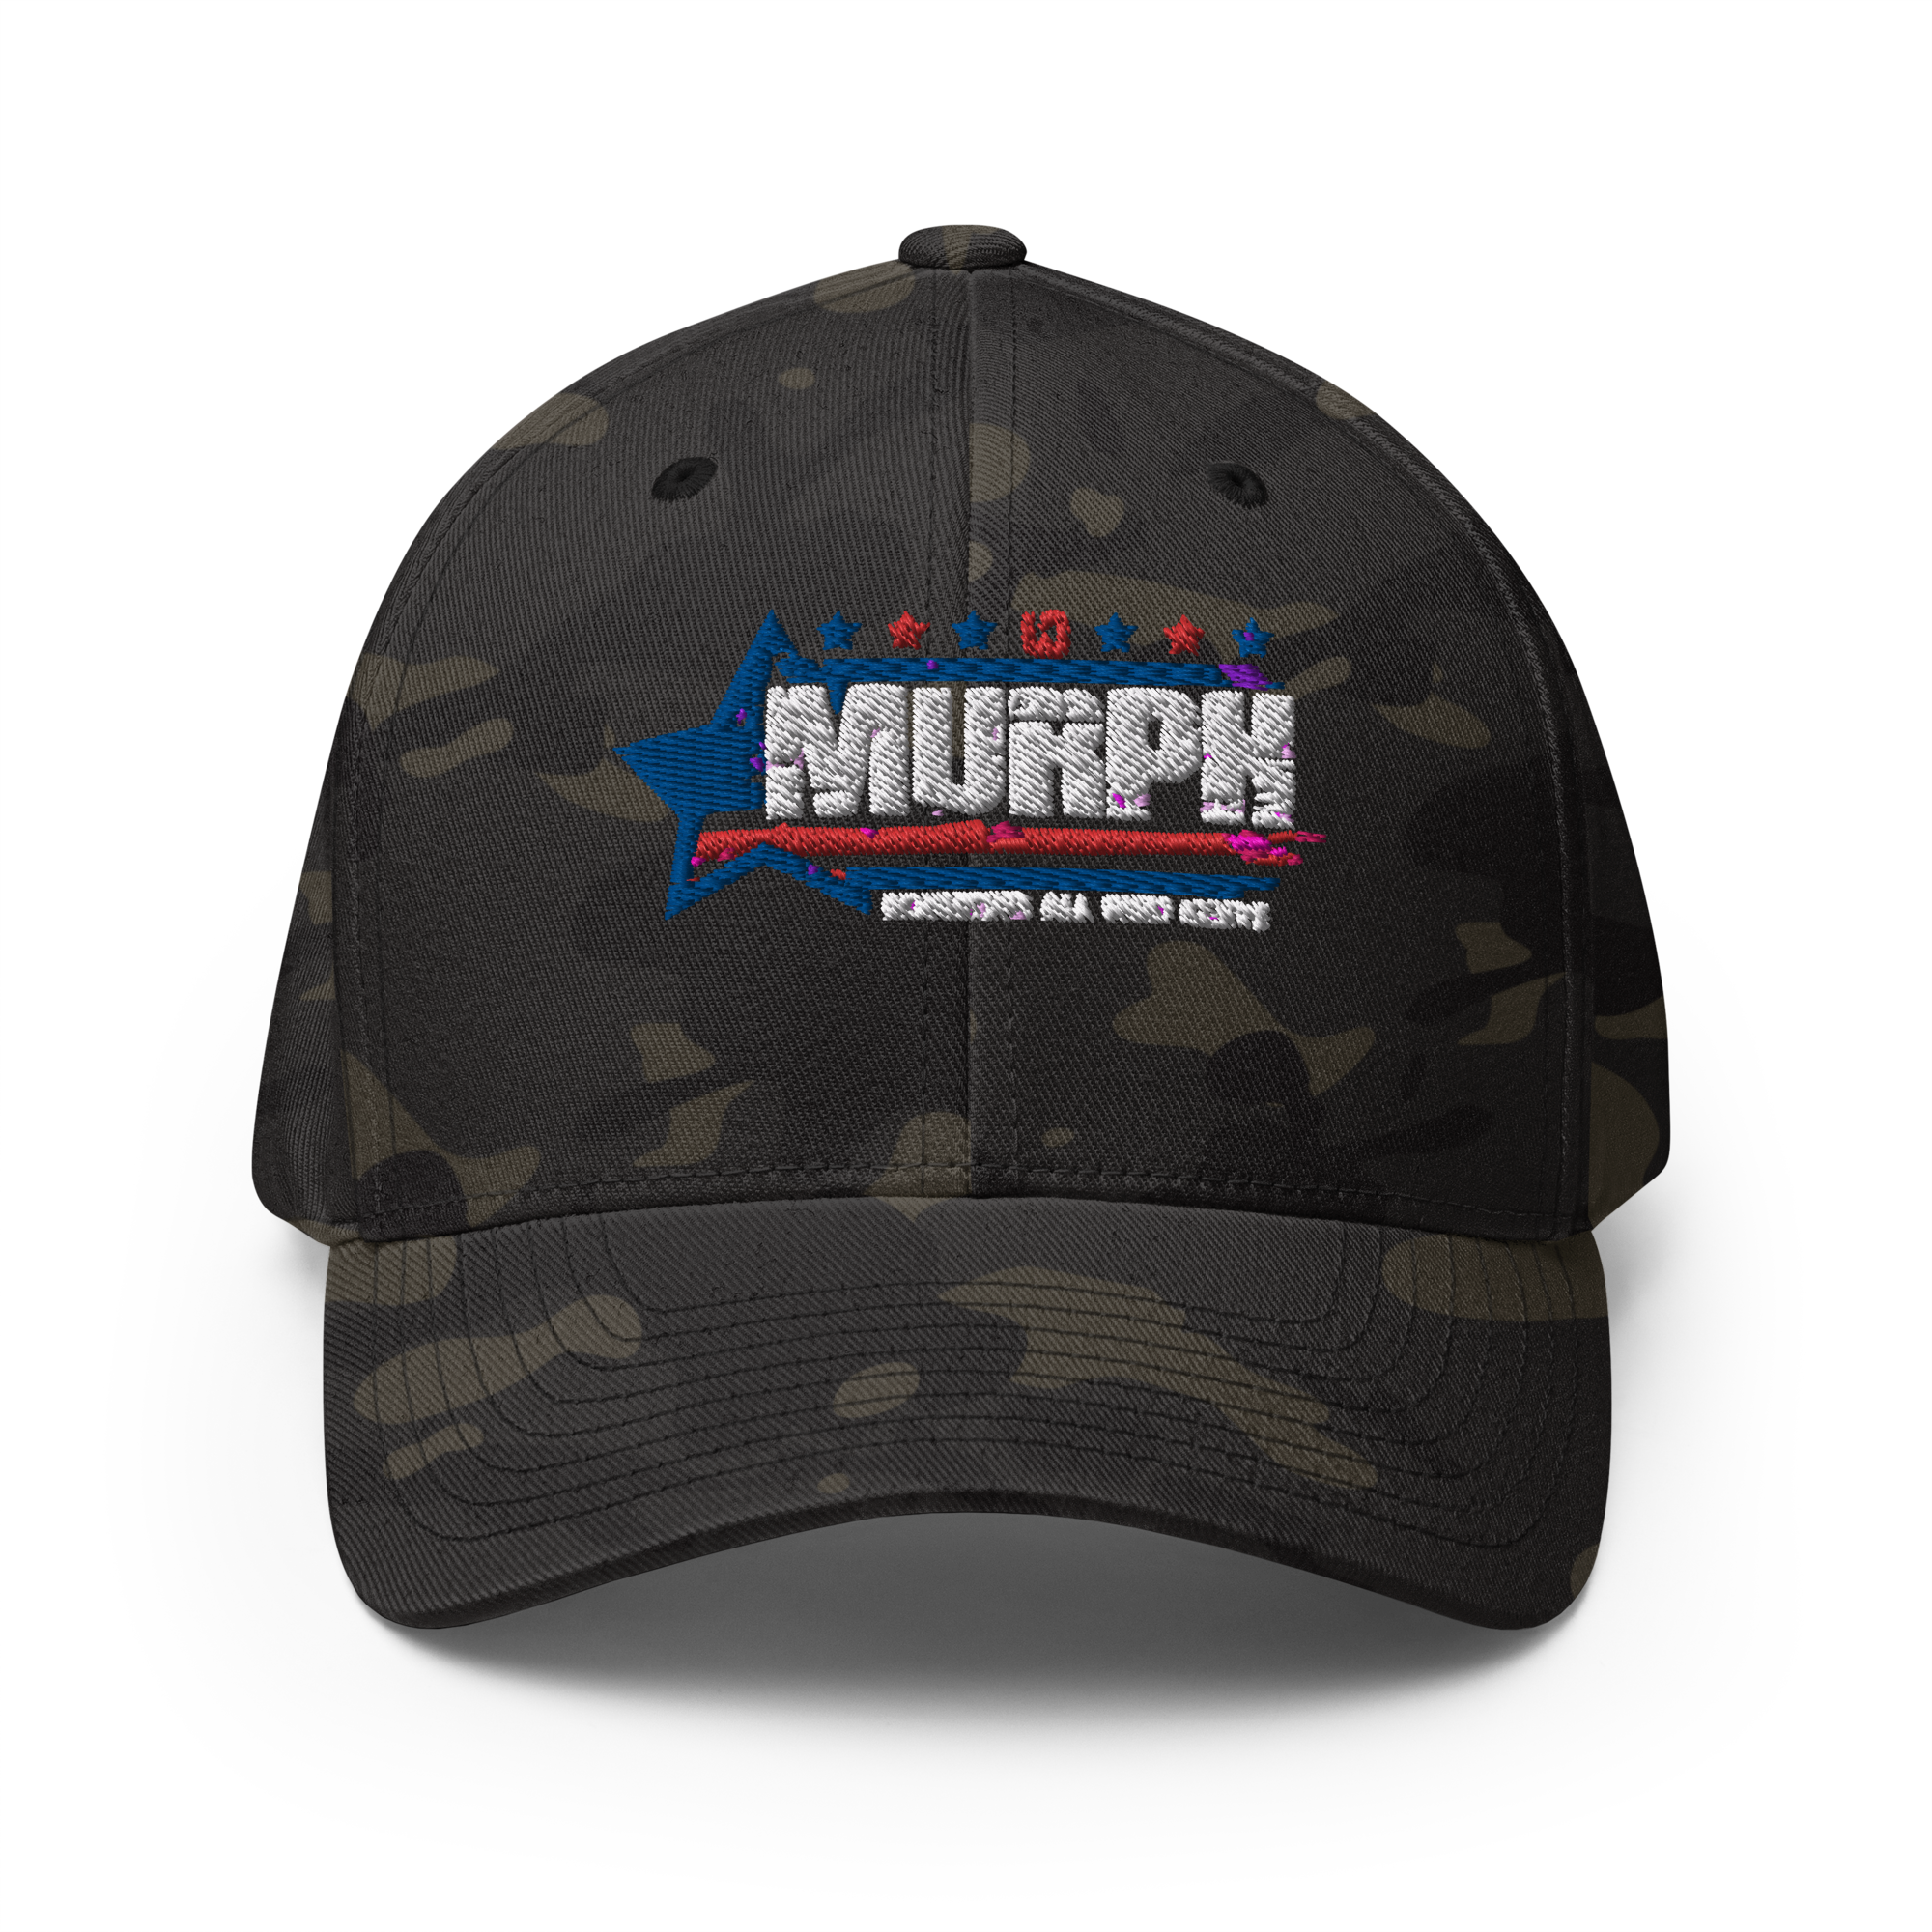 2022 WOD Obsessed Memorial Day Murph Challenge Structured Twill Cap - wodobsessed.com Cross Functional Training Apparel 